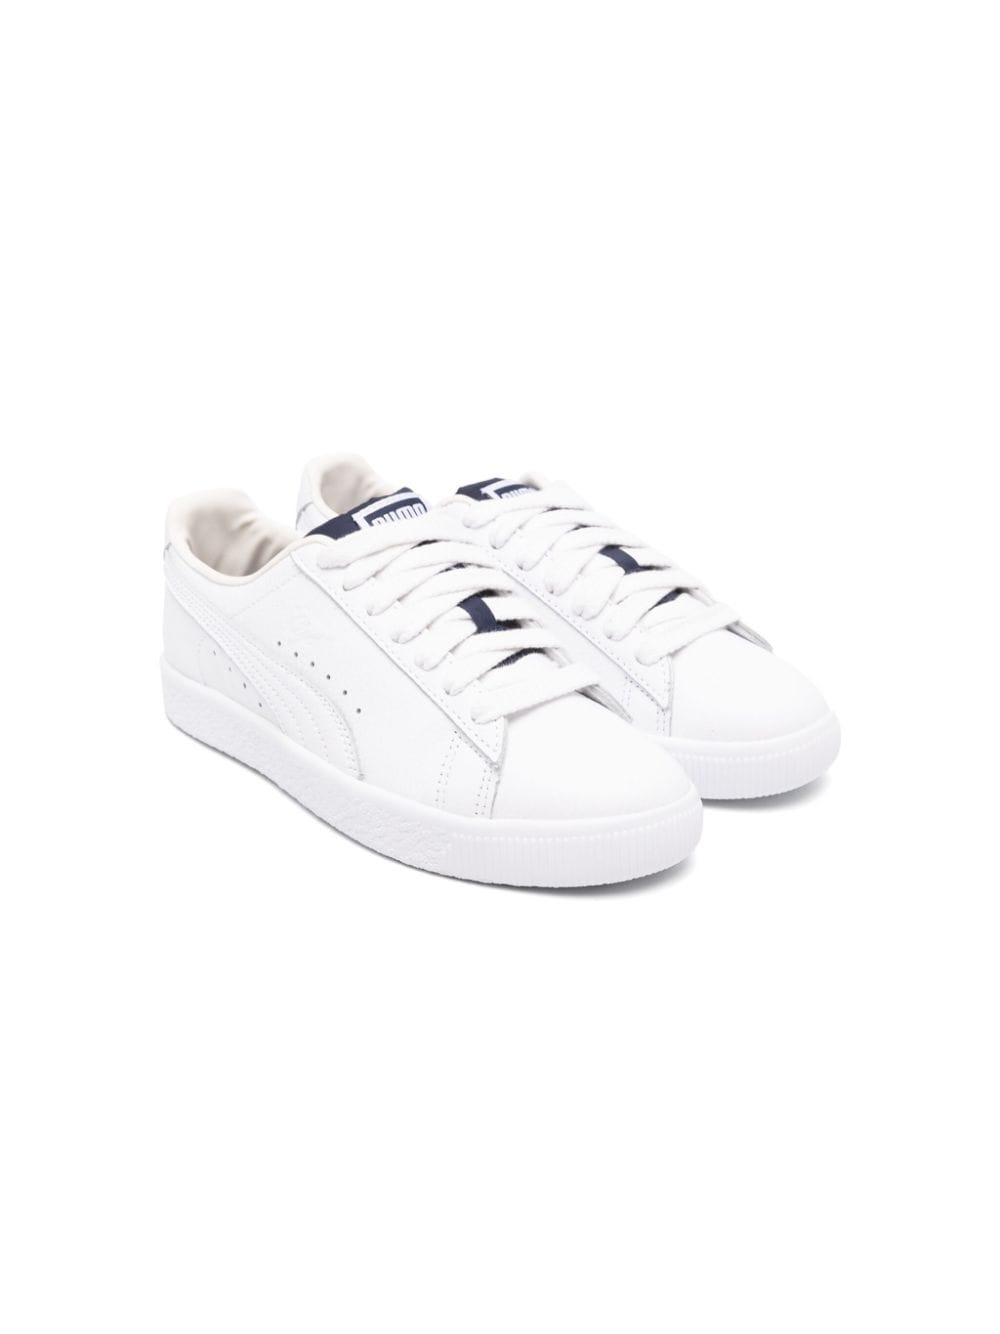 Puma Kids Clyde Varsity II leather sneakers White